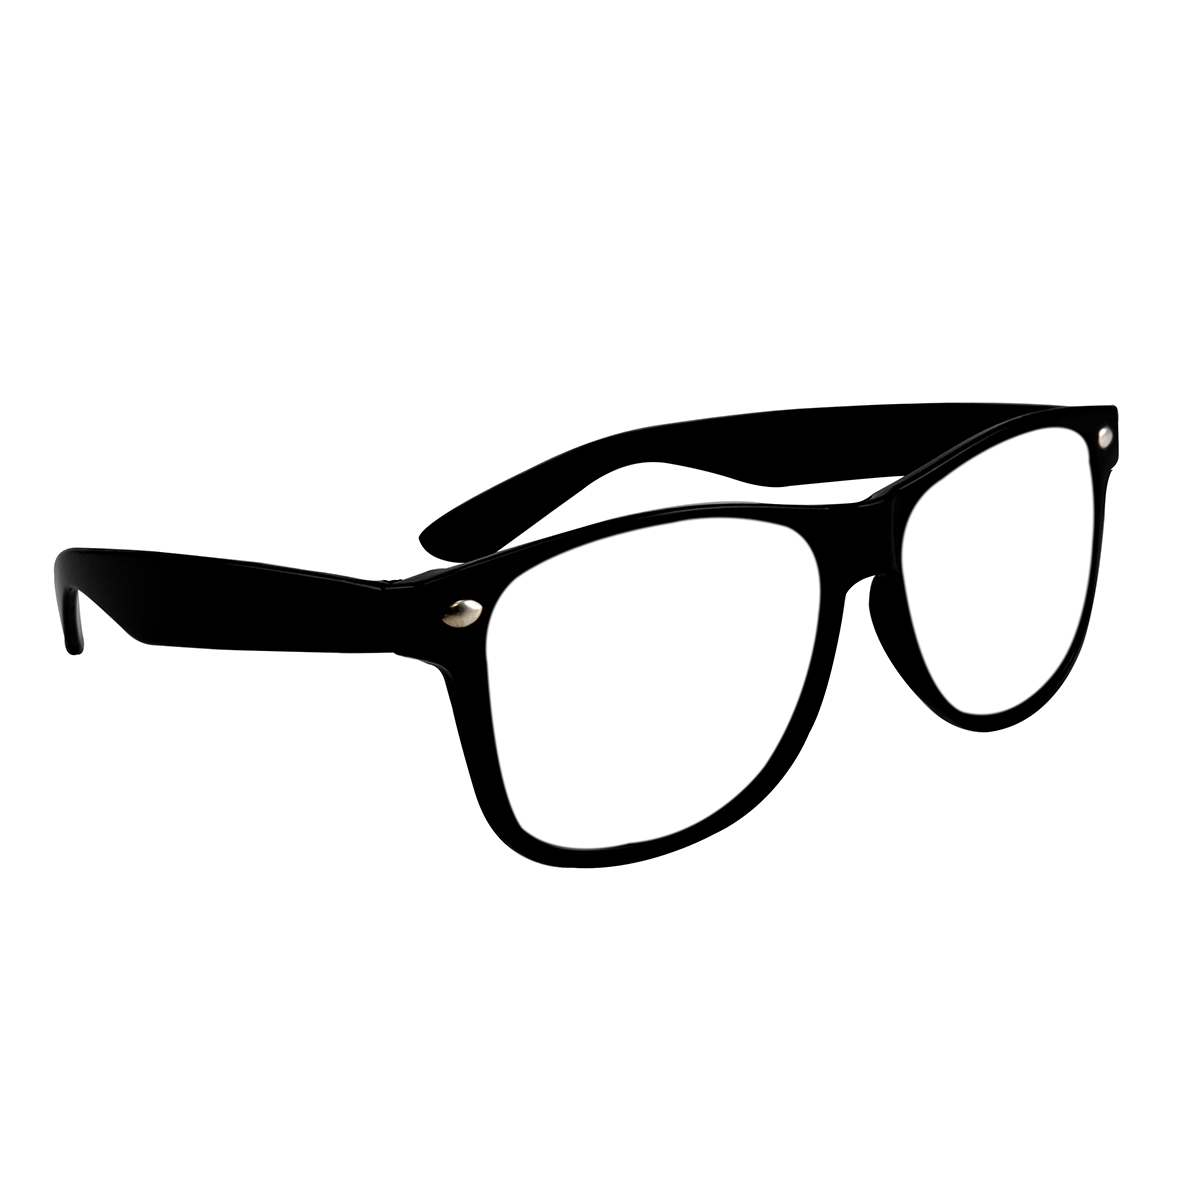 Black Miami Glasses with Clear Lens